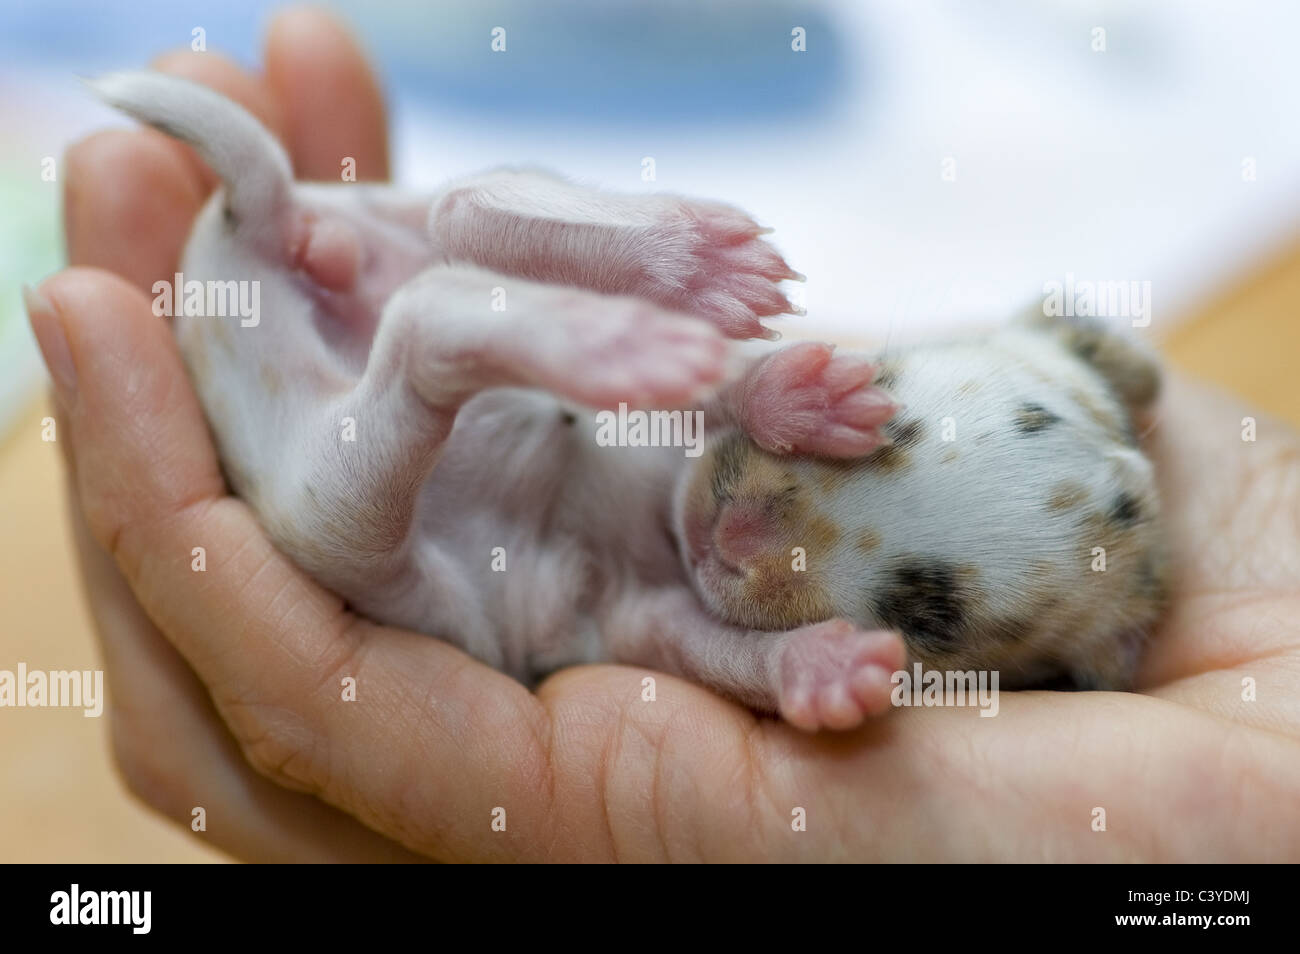 Dwarf rabbit, baby, fur, hand, hands, hare, rabbit, domestic animal, pet, pets, young, new, small, little, smaller, recumbent, l Stock Photo